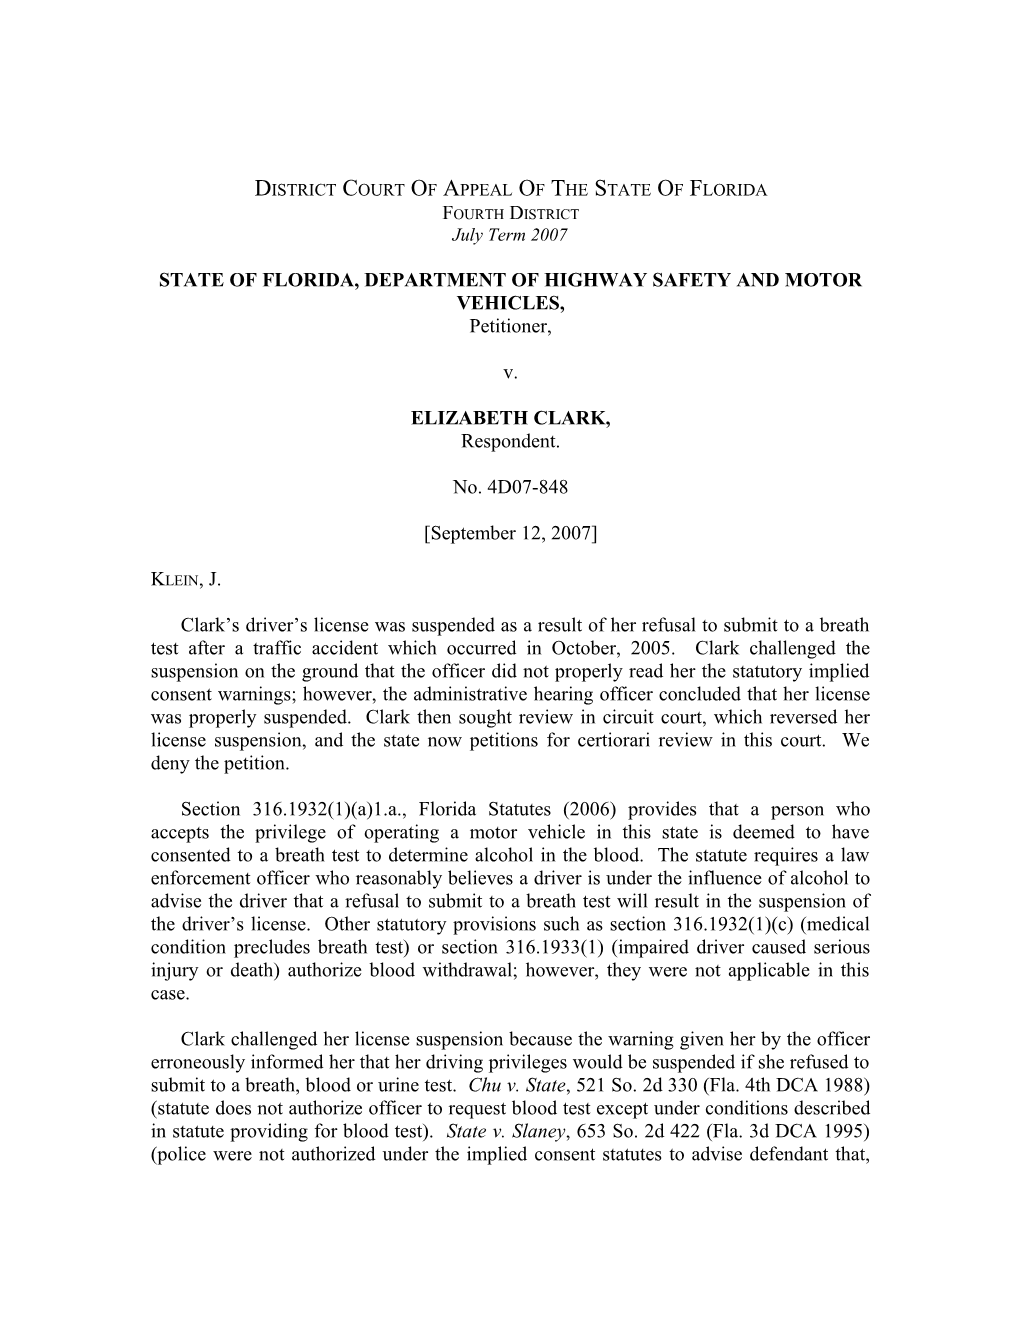 District Court of Appeal of the State of Florida s1